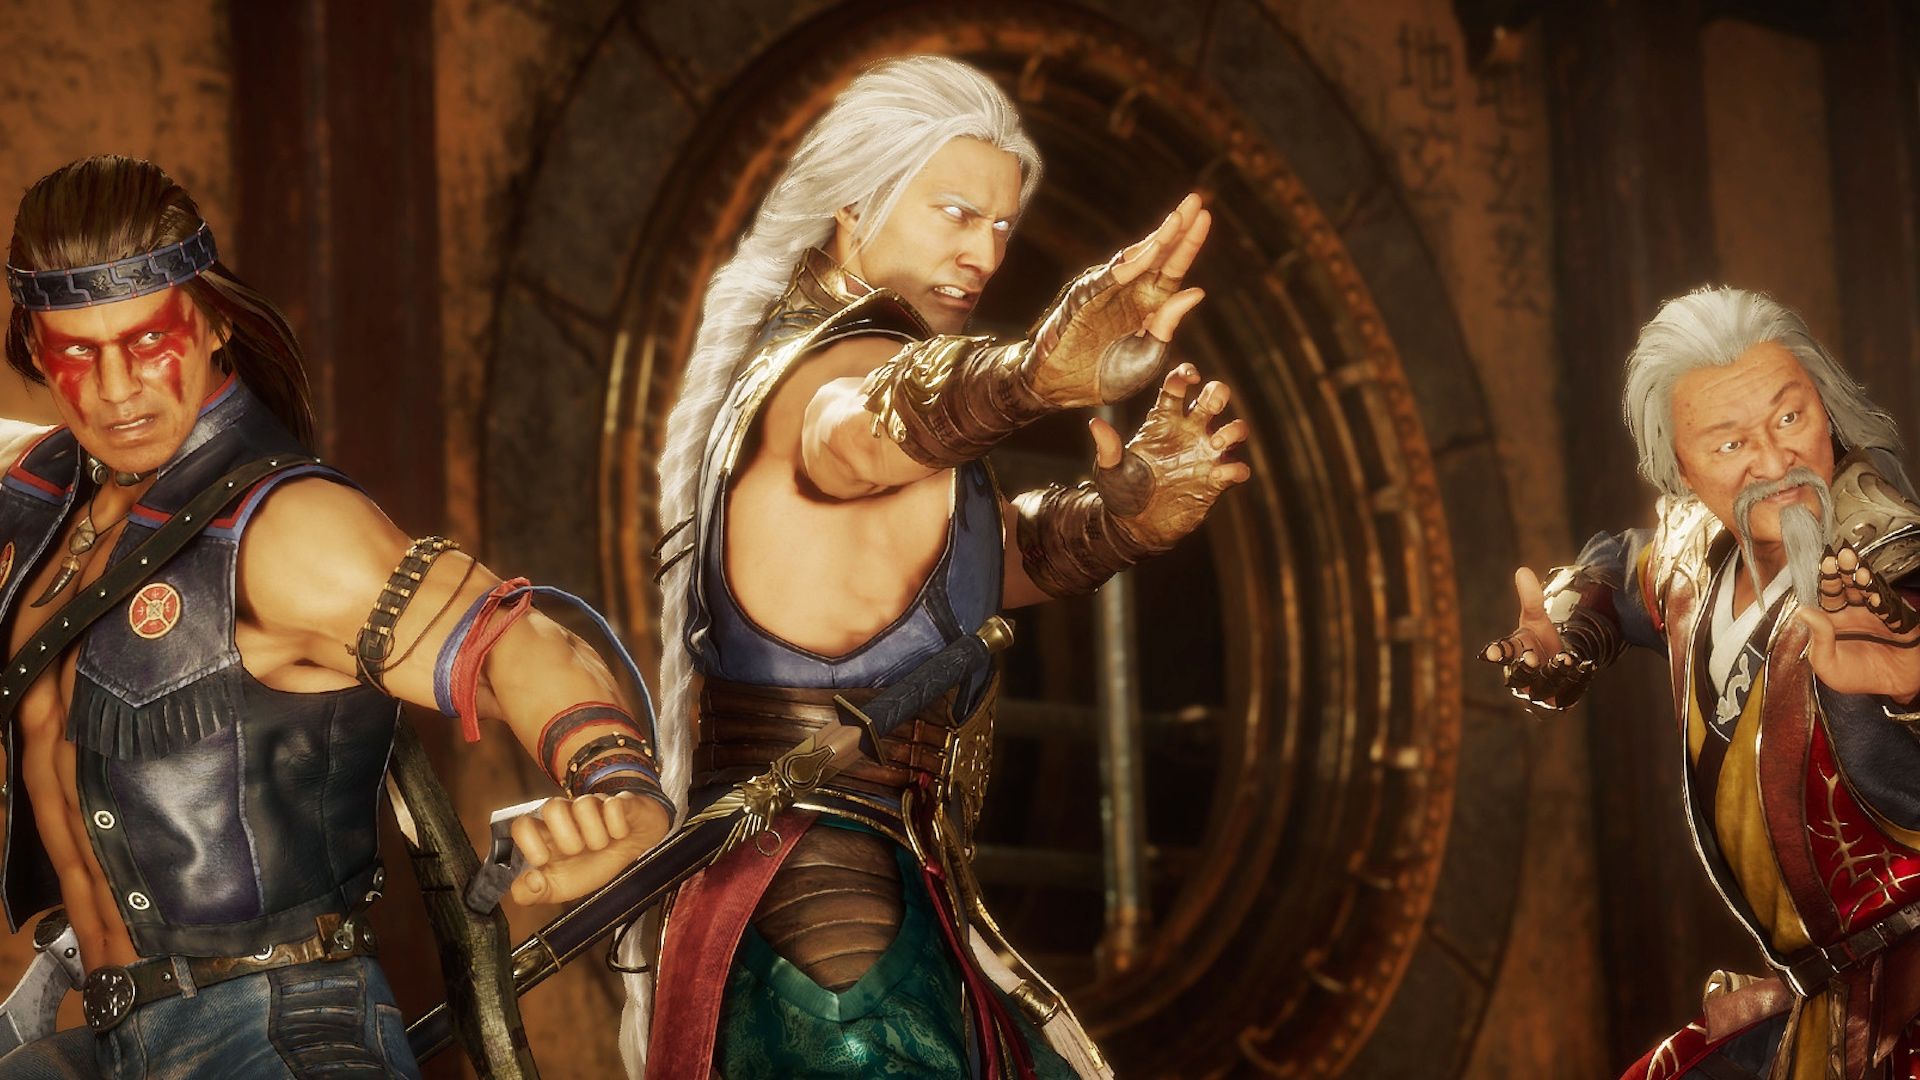 Mortal Kombat 11: Aftermath Brings The Wind With Fujin Trailer